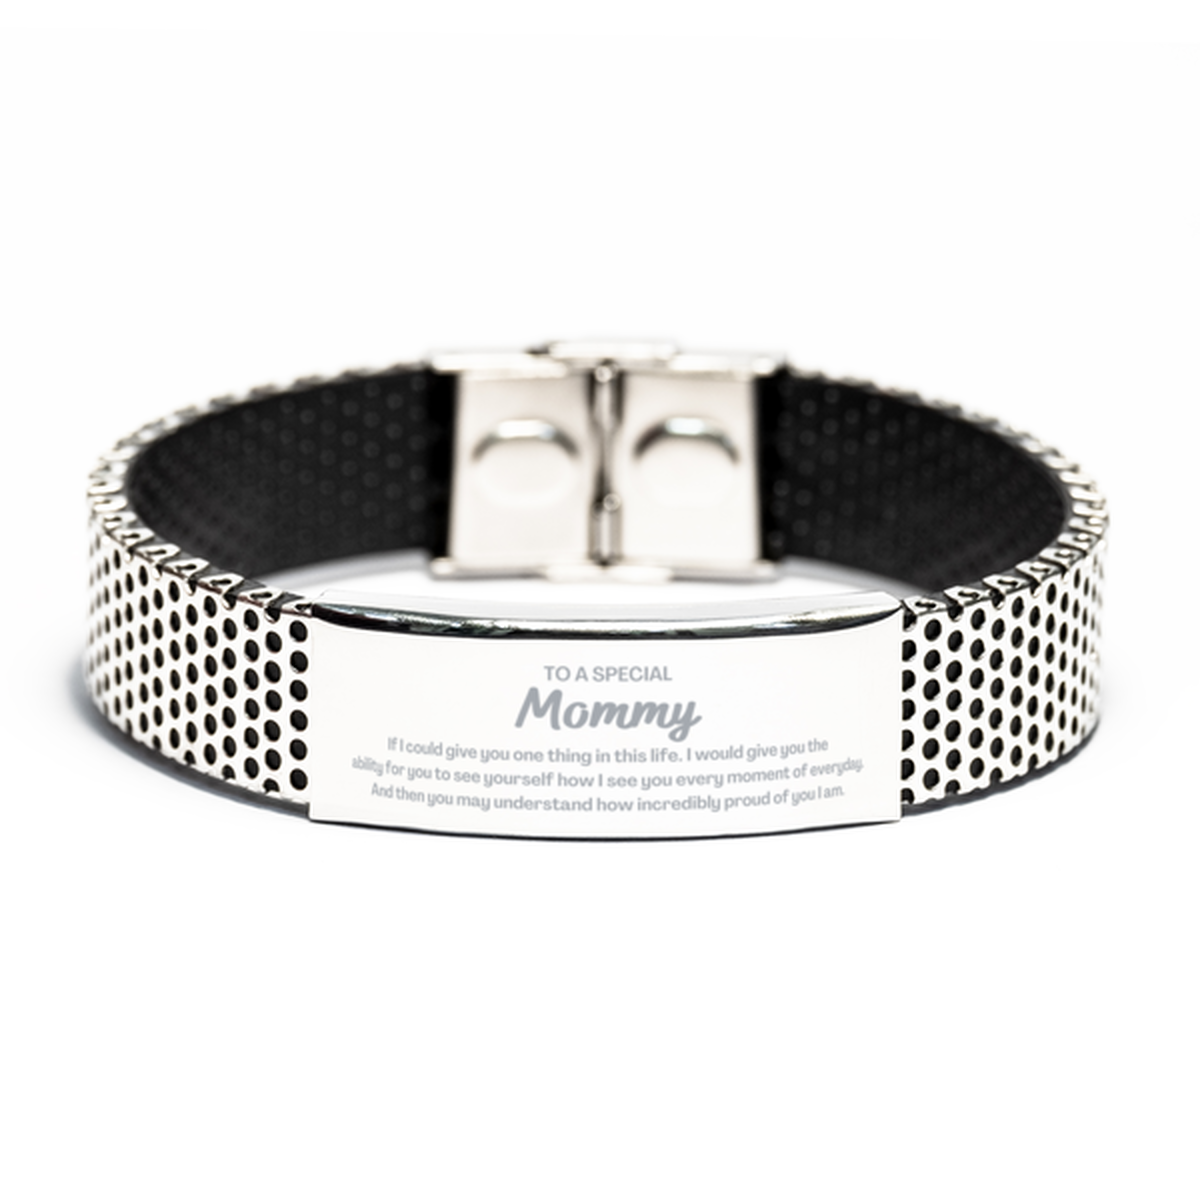 To My Mommy Stainless Steel Bracelet, Gifts For Mommy Engraved, Inspirational Gifts for Christmas Birthday, Epic Gifts for Mommy To A Special Mommy how incredibly proud of you I am